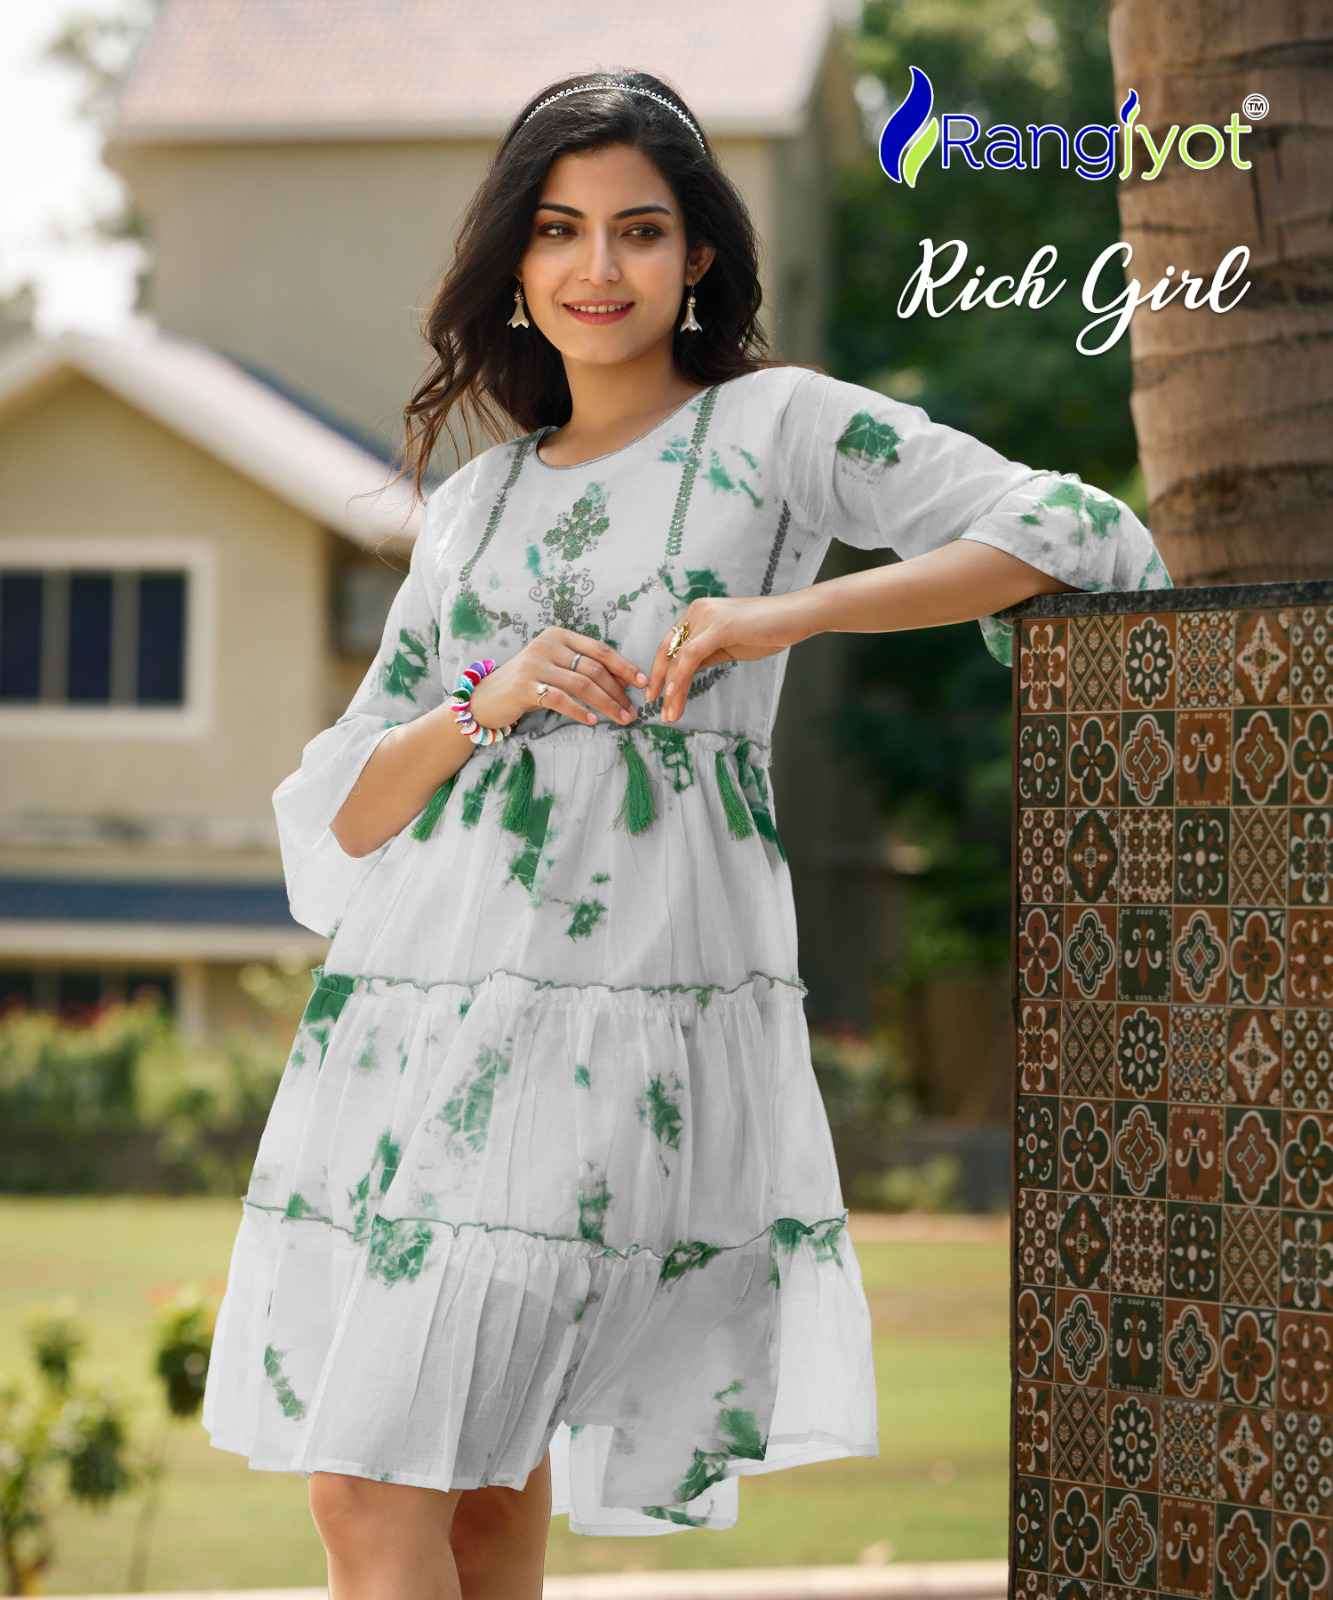 Rangjyot Rich Girl Floral Style Short Frock Ladies Collection Outfit Suppliers